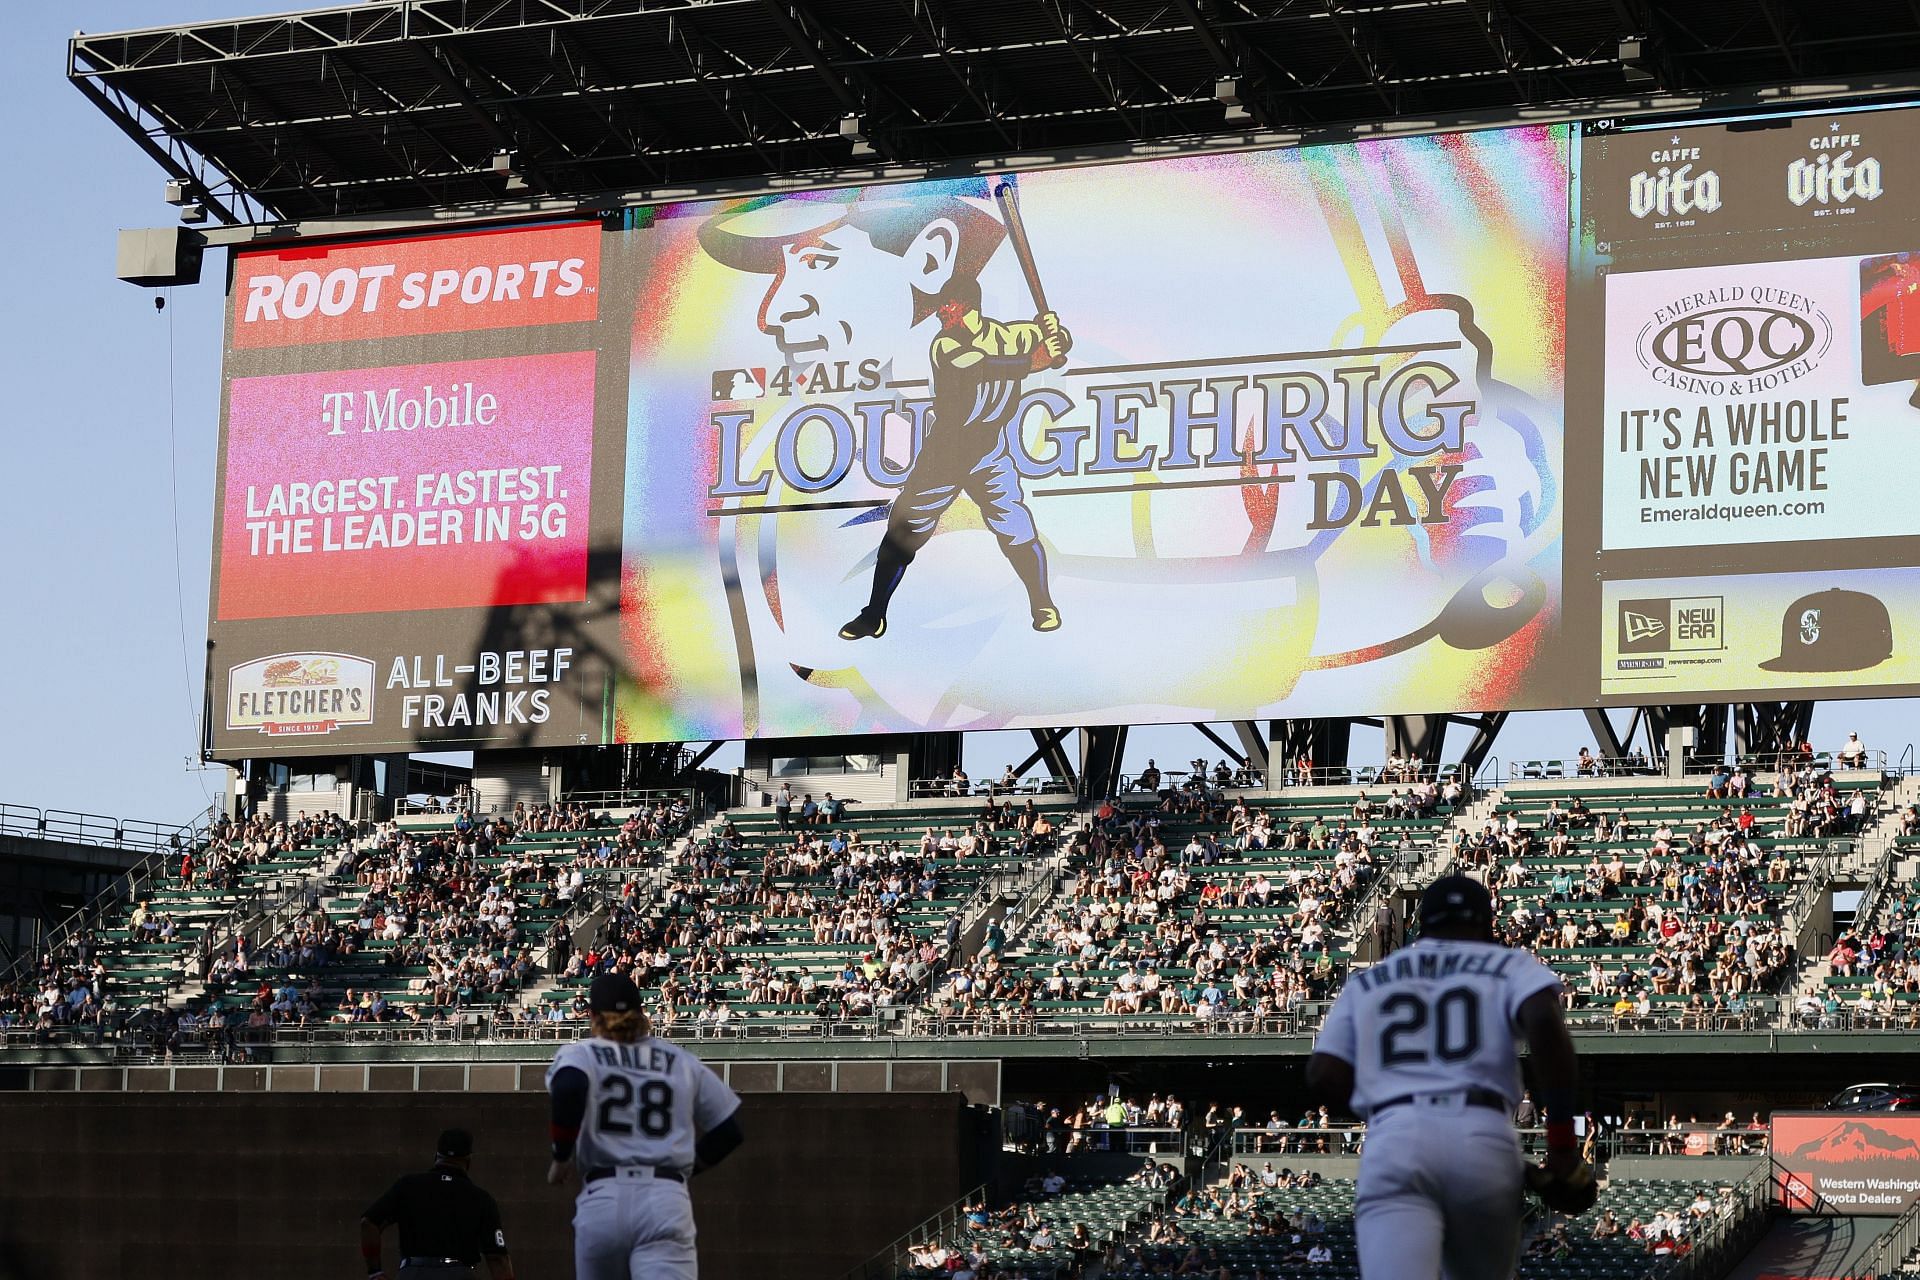 MLB celebrates second annual Lou Gehrig Day